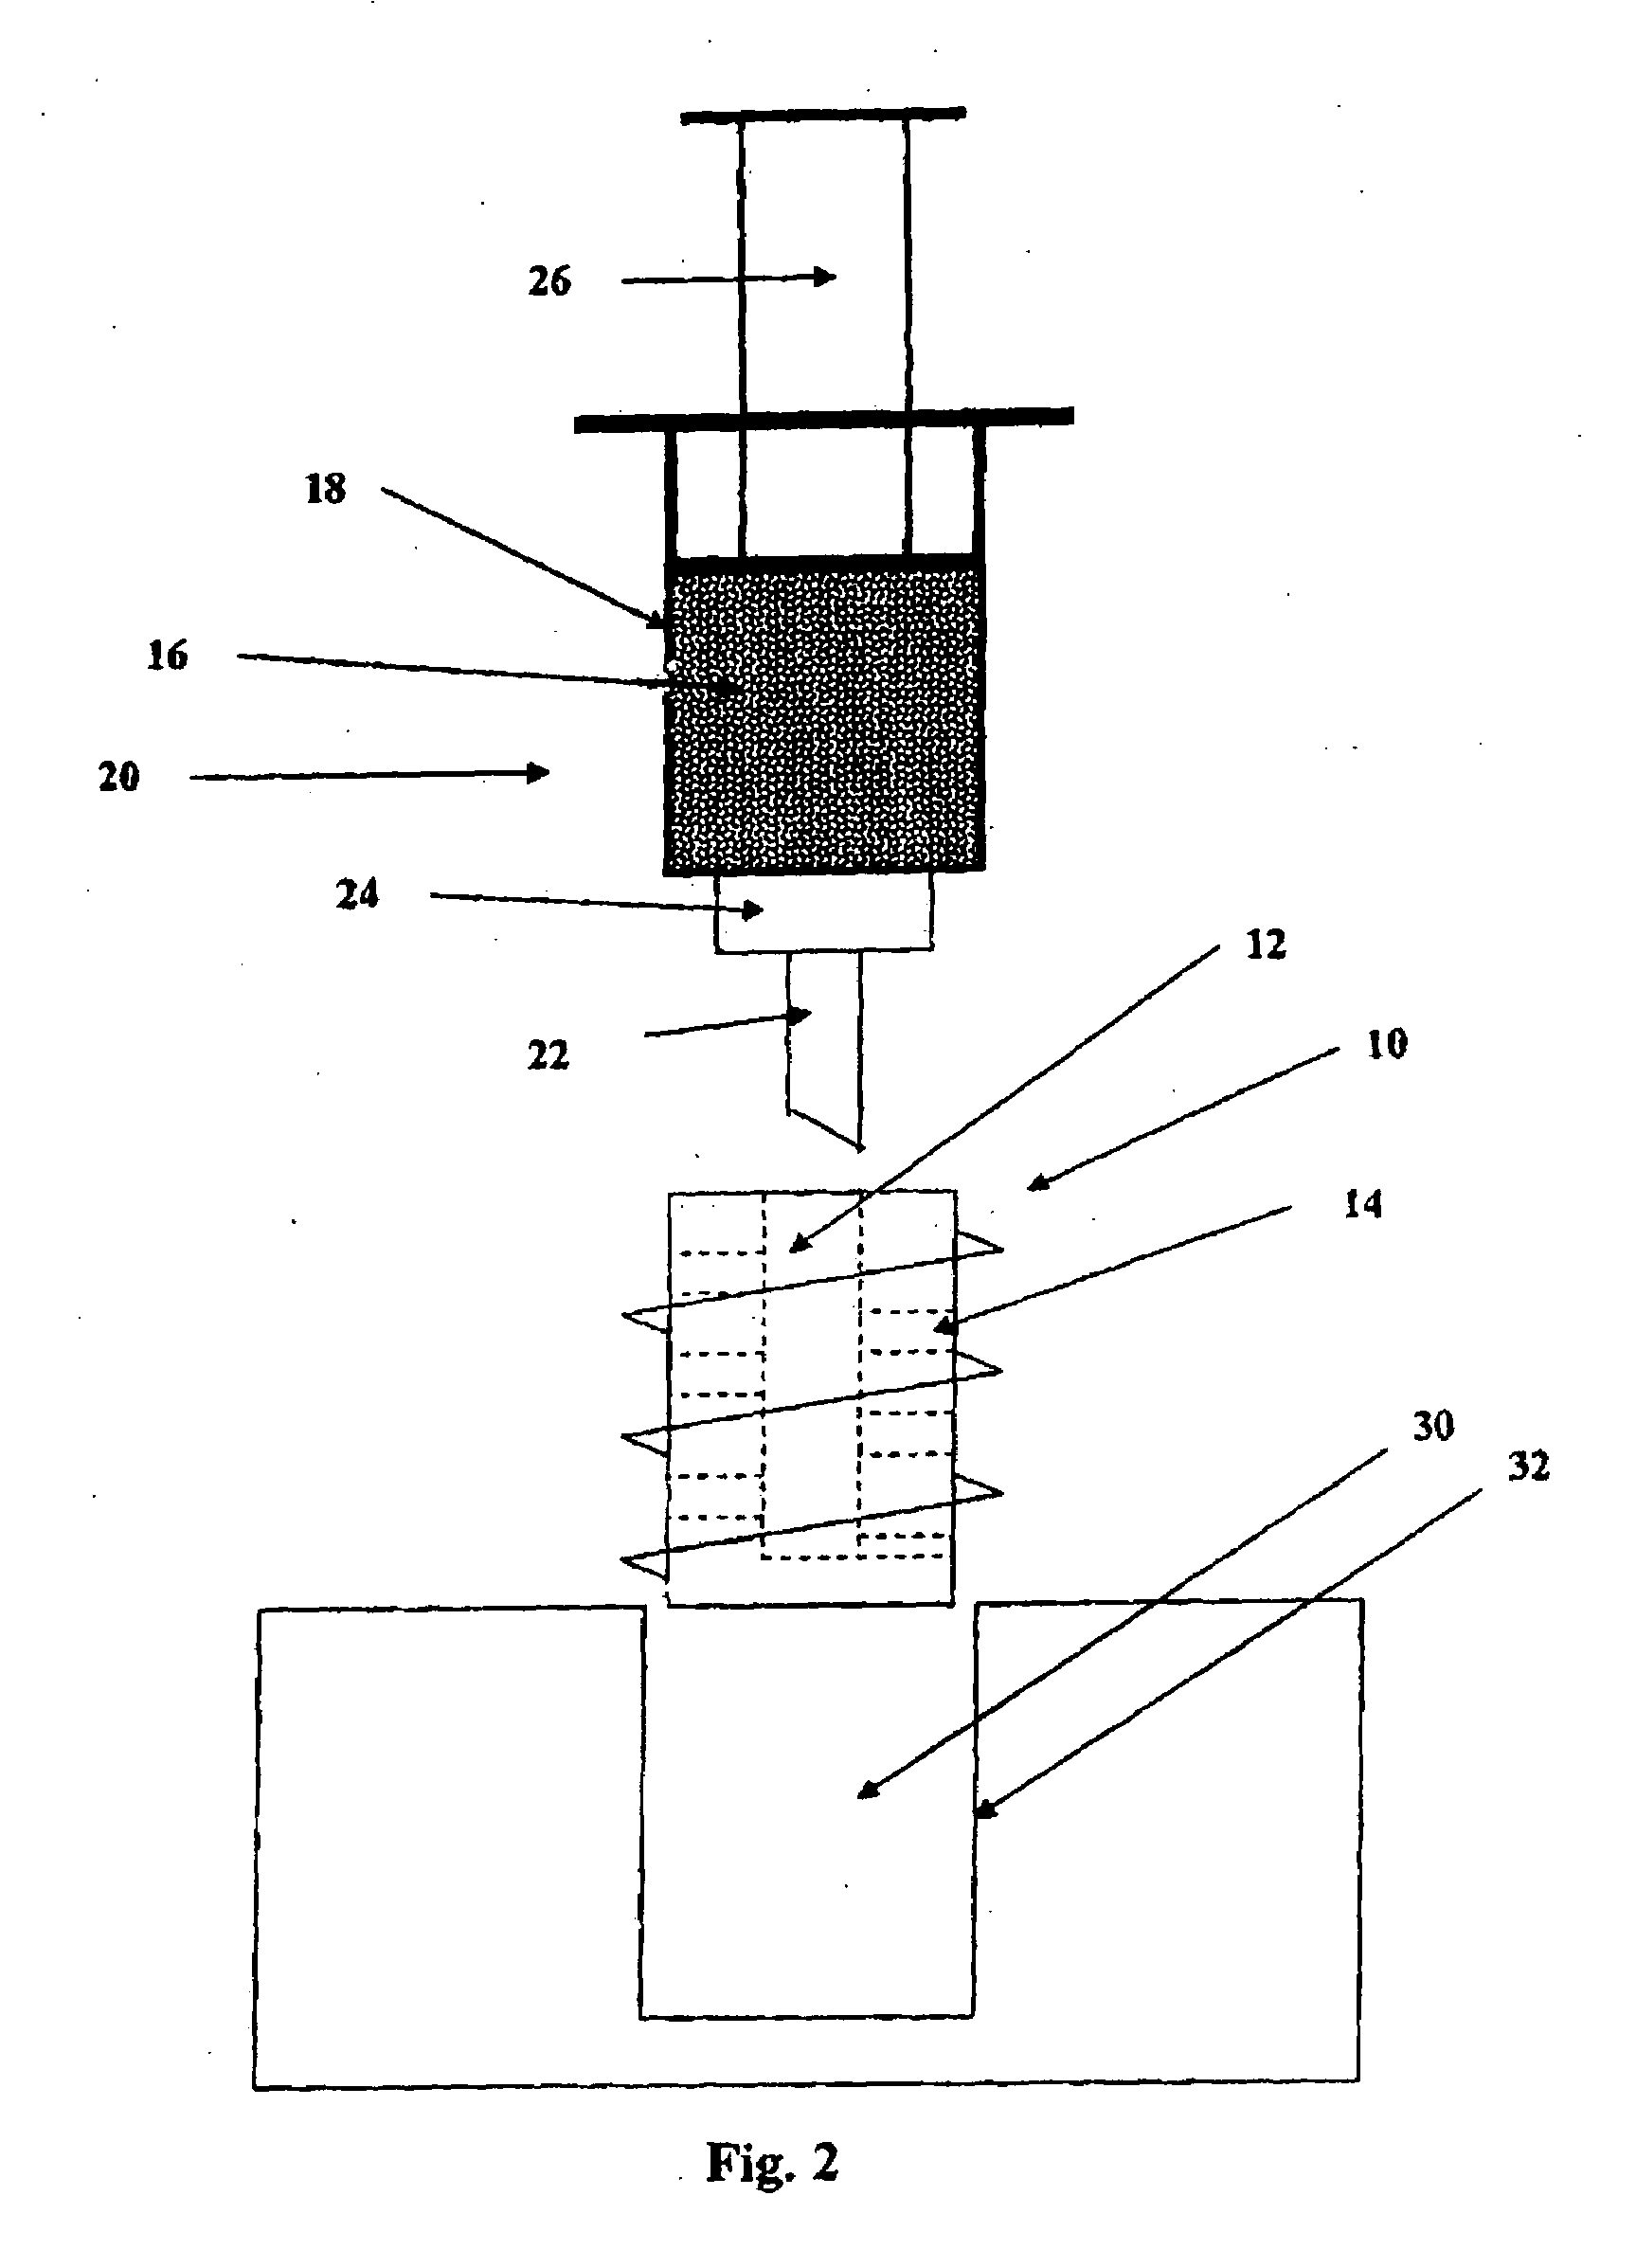 Methods of treating spinal injuries using injectable flowable compositions comprising organic materials